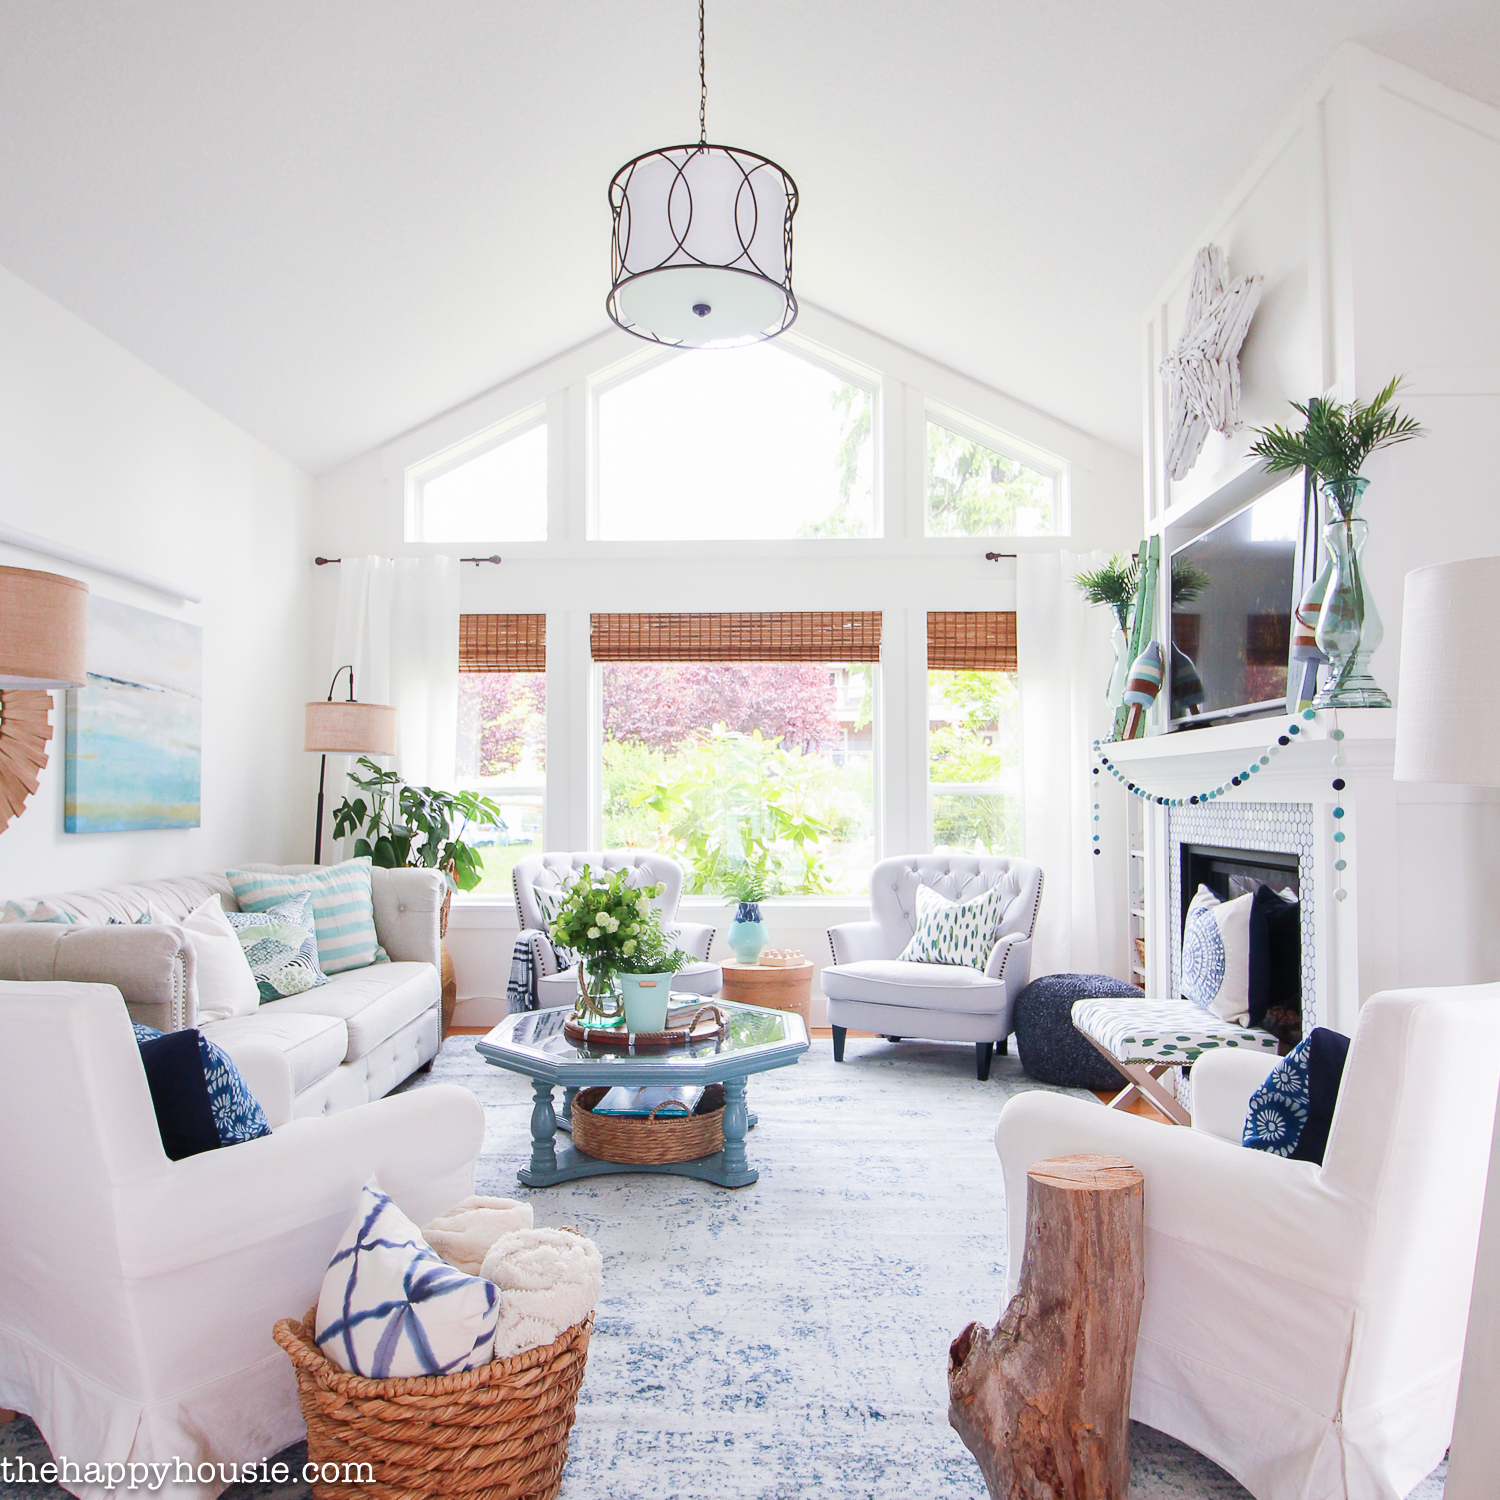 A white beachy living room with white couches, wood details and wicker baskets.